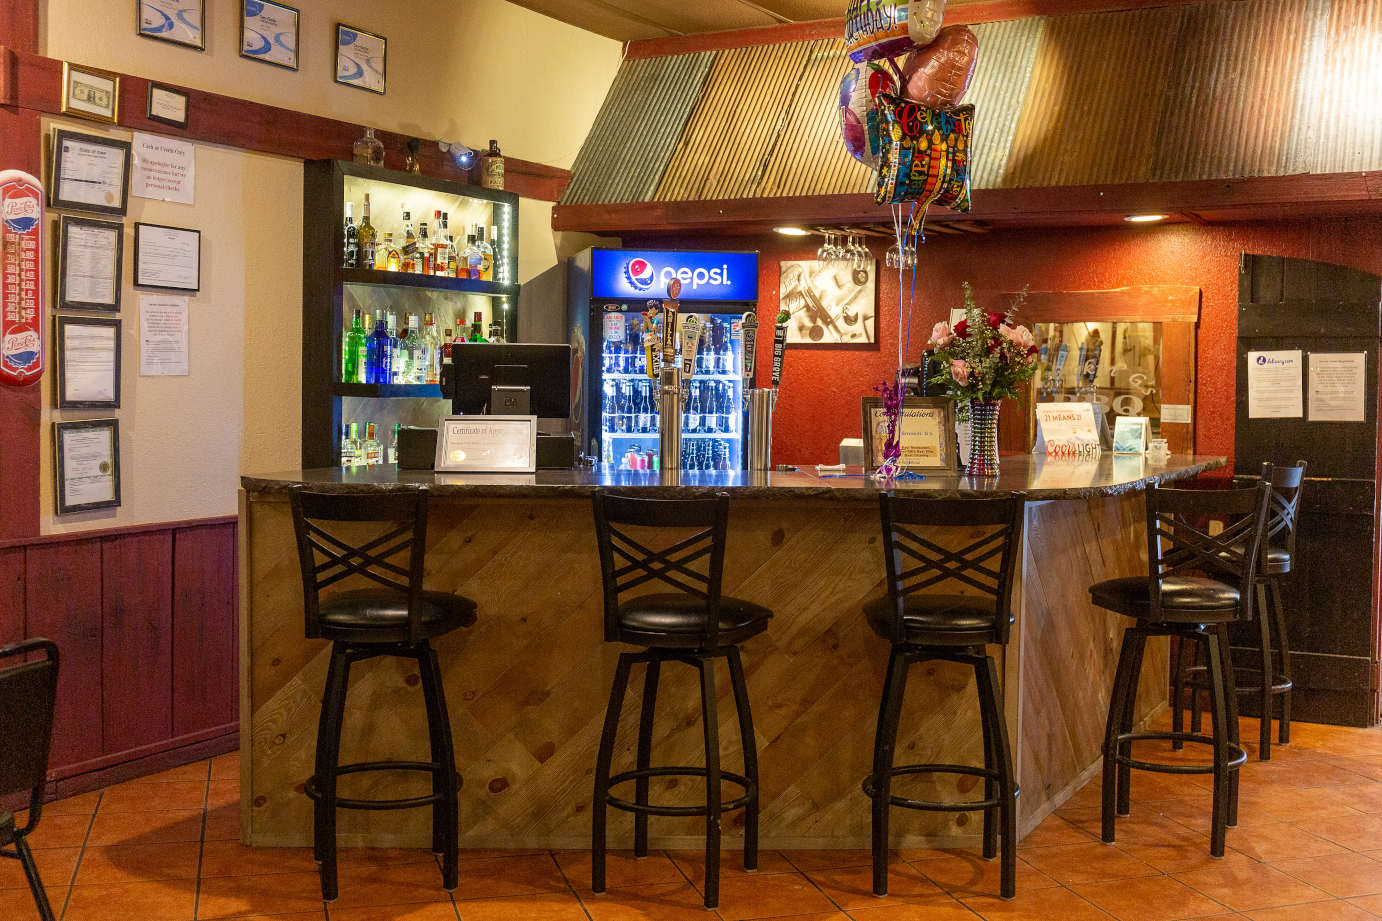 Interior, the bar with stools